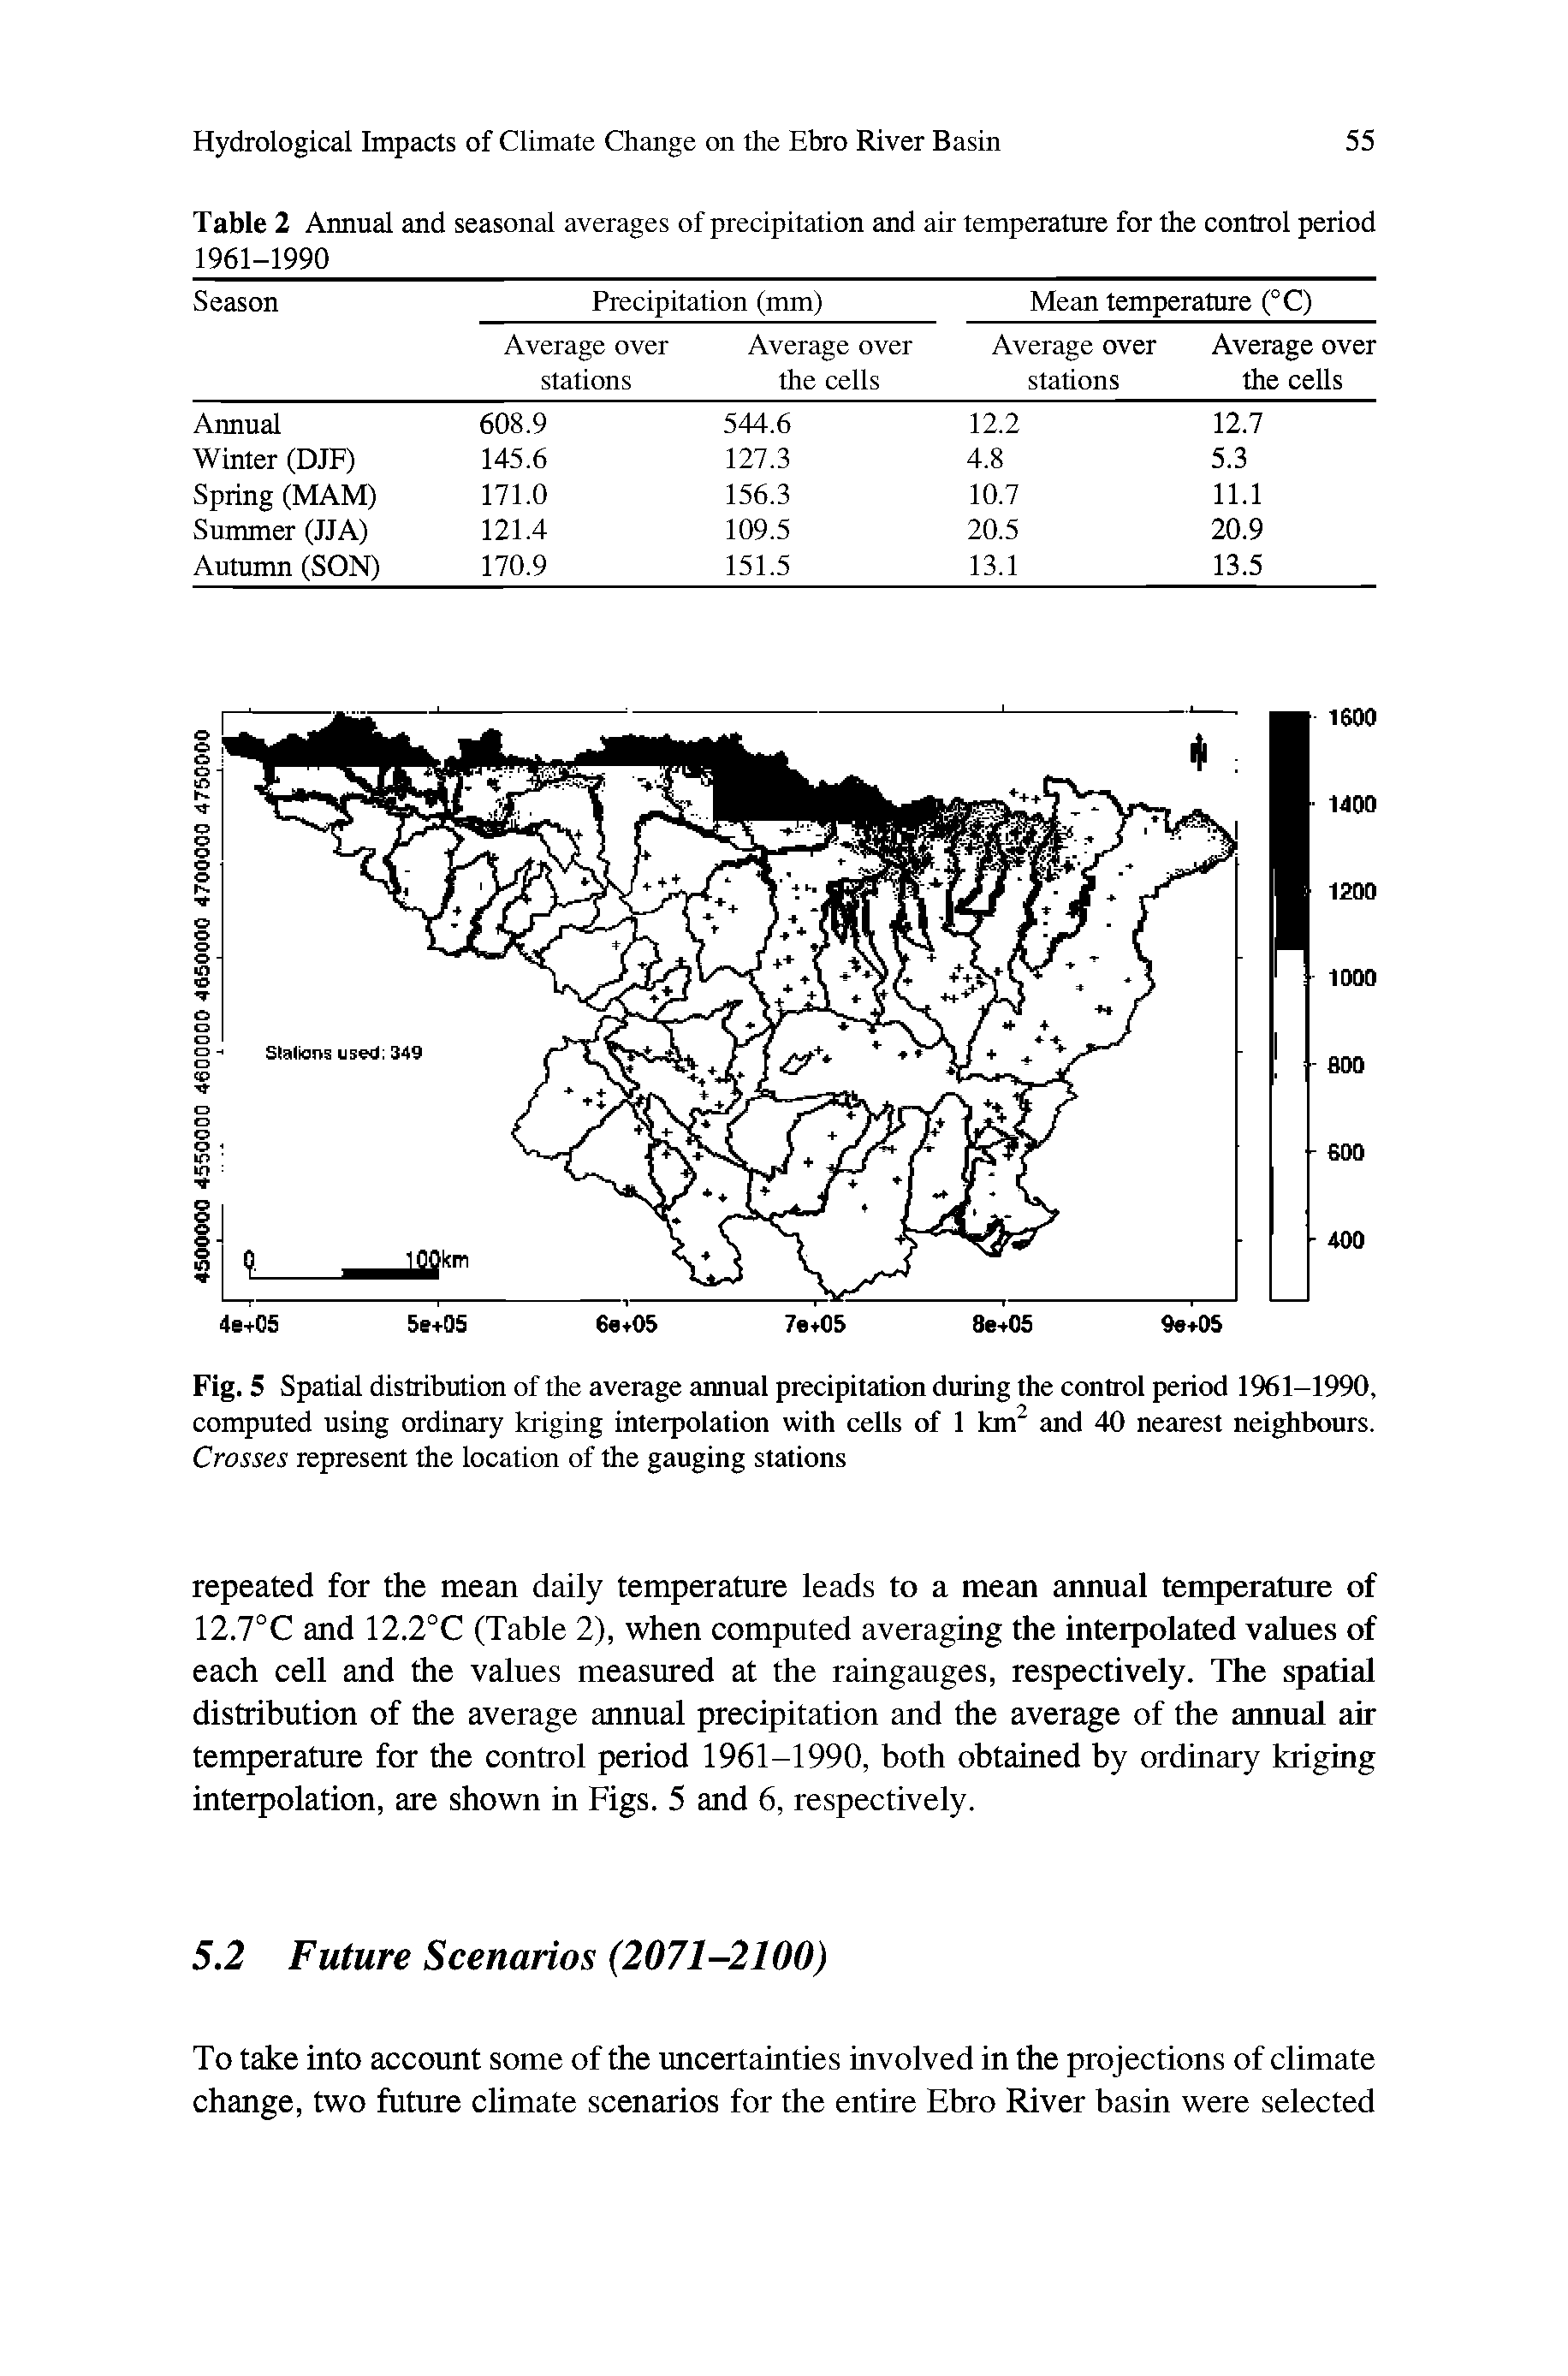 Fig. 5 Spatial distribution of the average annual precipitation during the control period 1961-1990, computed using ordinary kriging interpolation with cells of 1 km2 and 40 nearest neighbours. Crosses represent the location of the gauging stations...